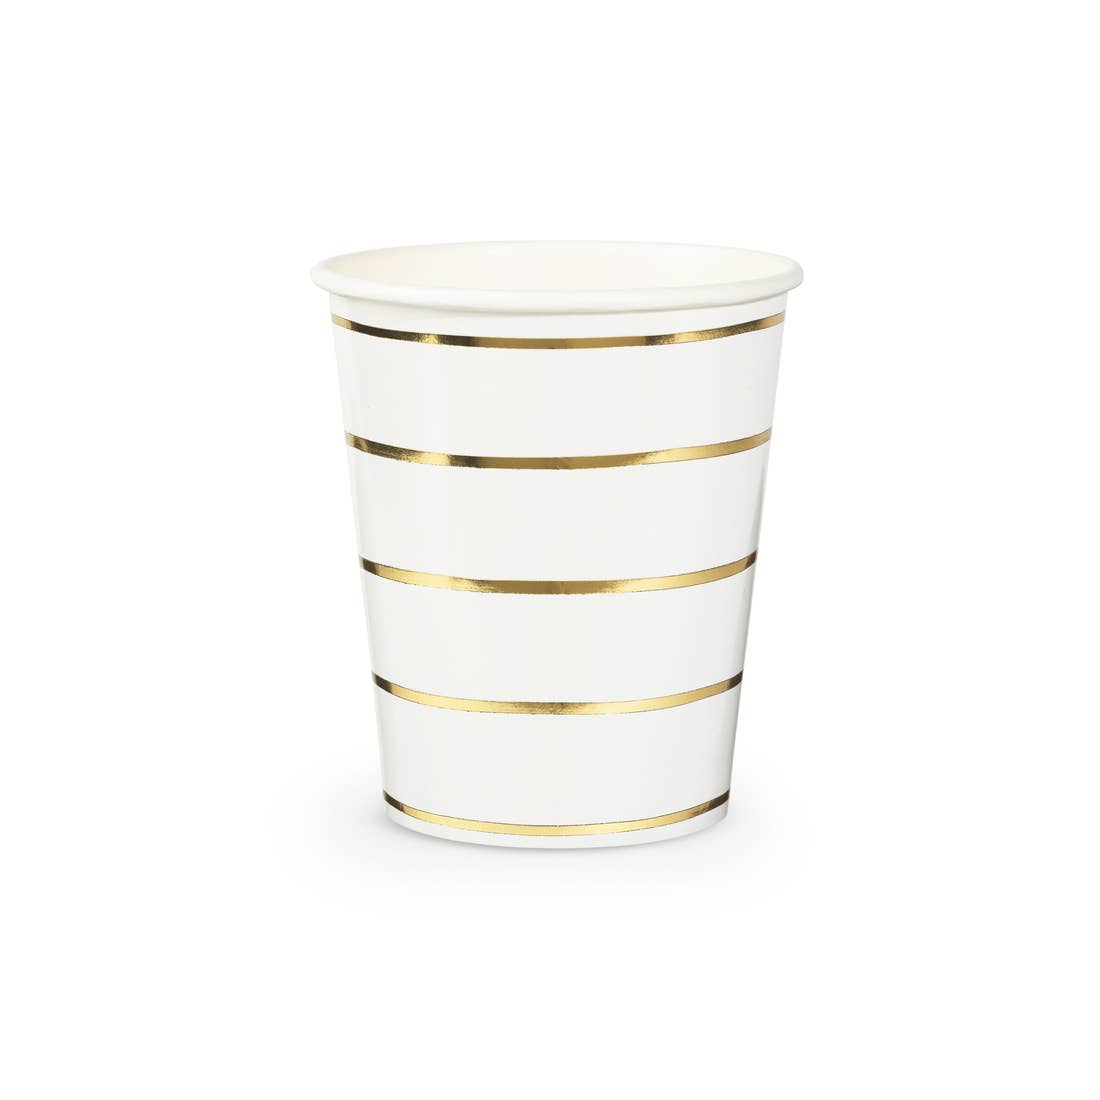 Frenchie Metallic Striped Cups in Gold Foil